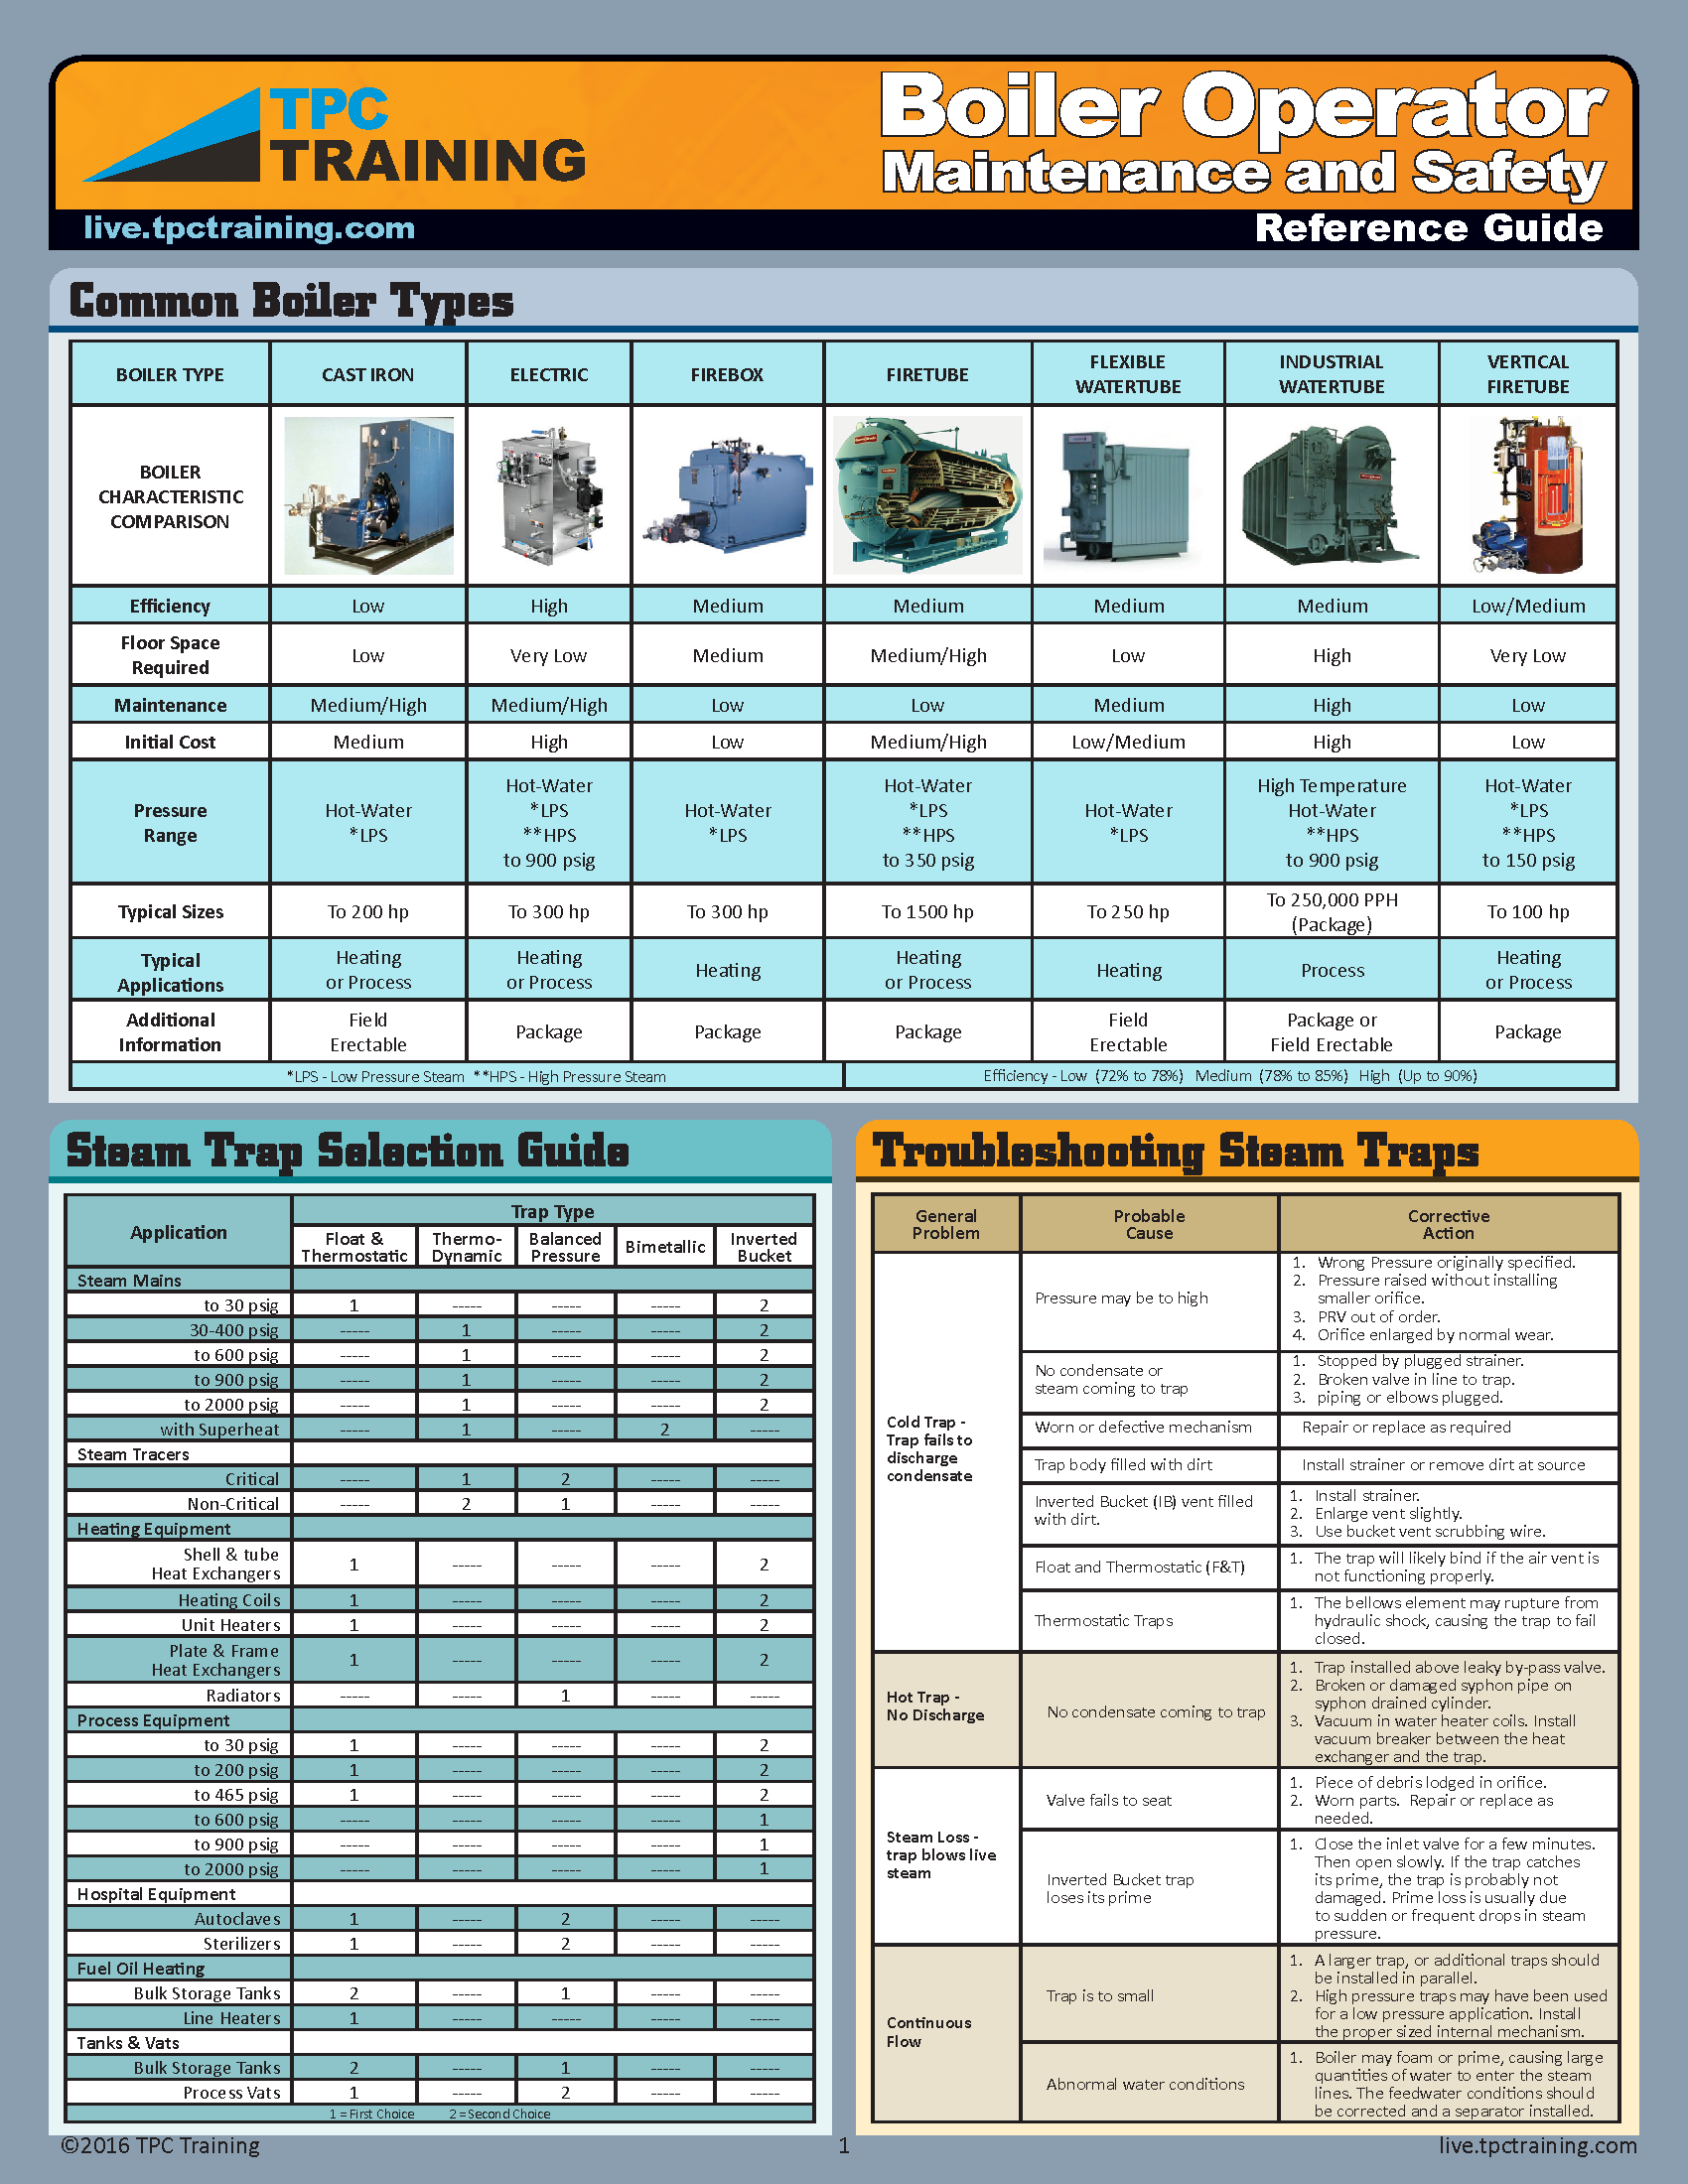 Boiler Operator Maintenance and Safety Quick Reference Guide